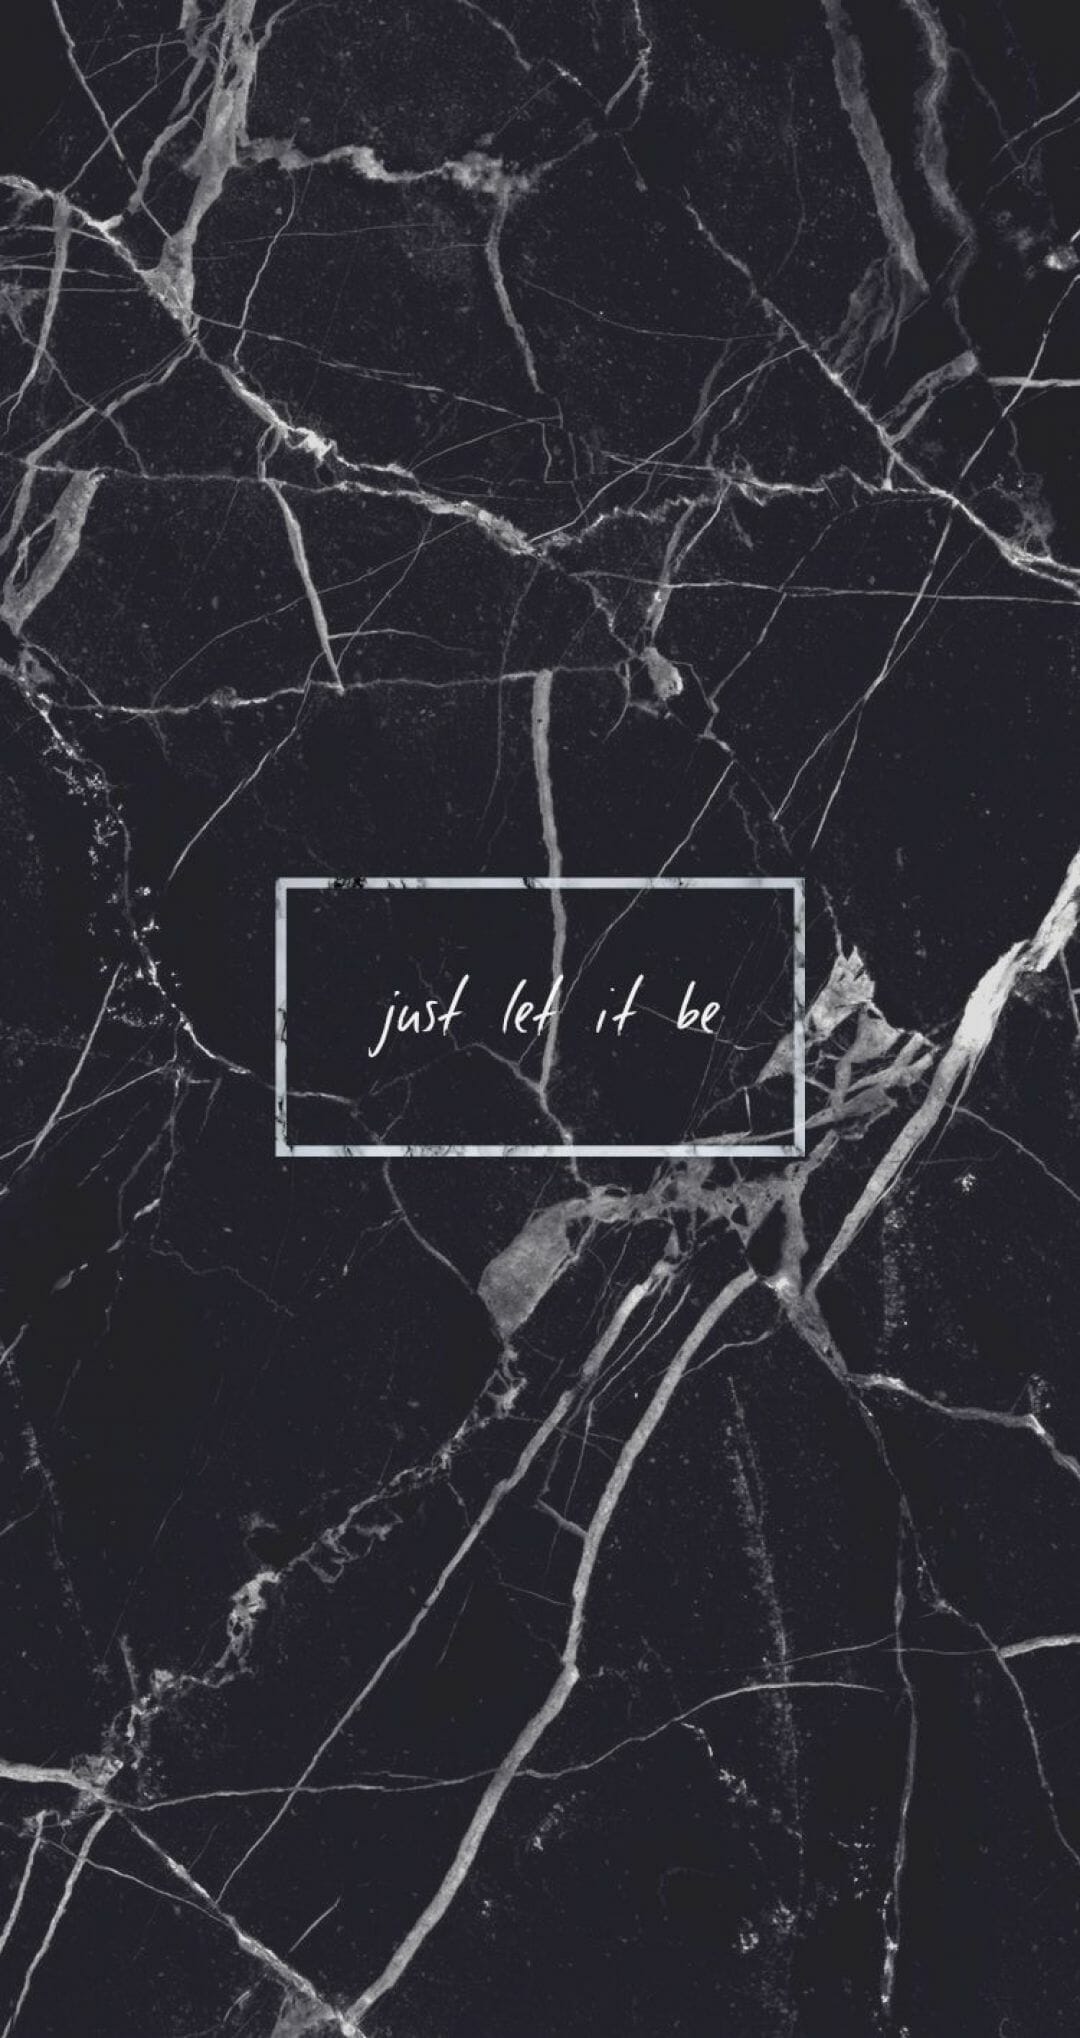 Black Marble Just Let It Be Quote Grunge Aesthetic